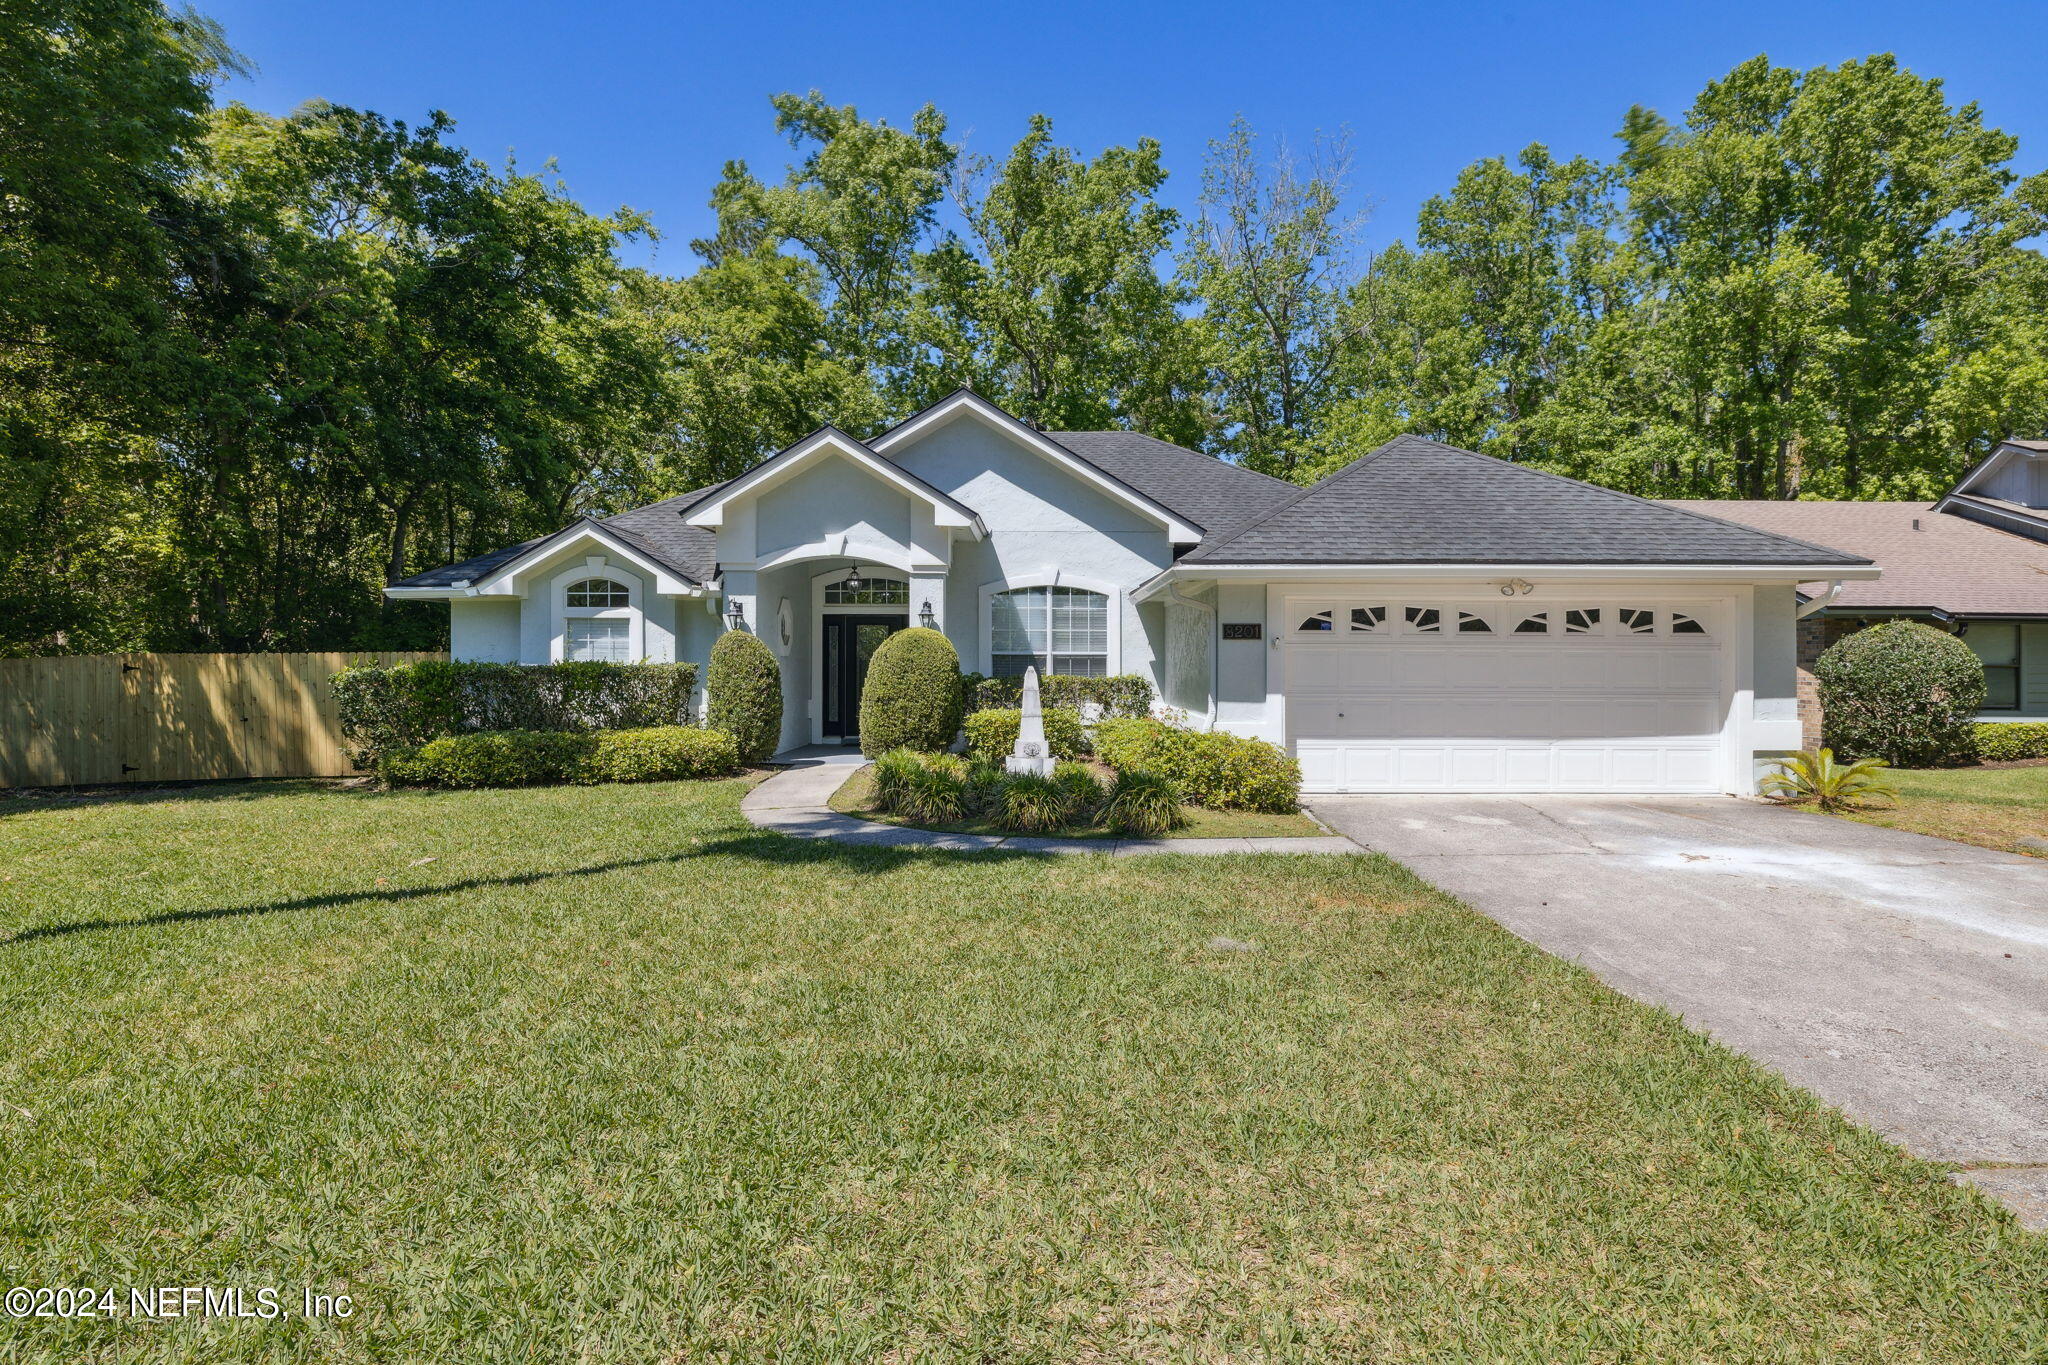 Jacksonville, FL home for sale located at 8201 Boatwright Way, Jacksonville, FL 32216